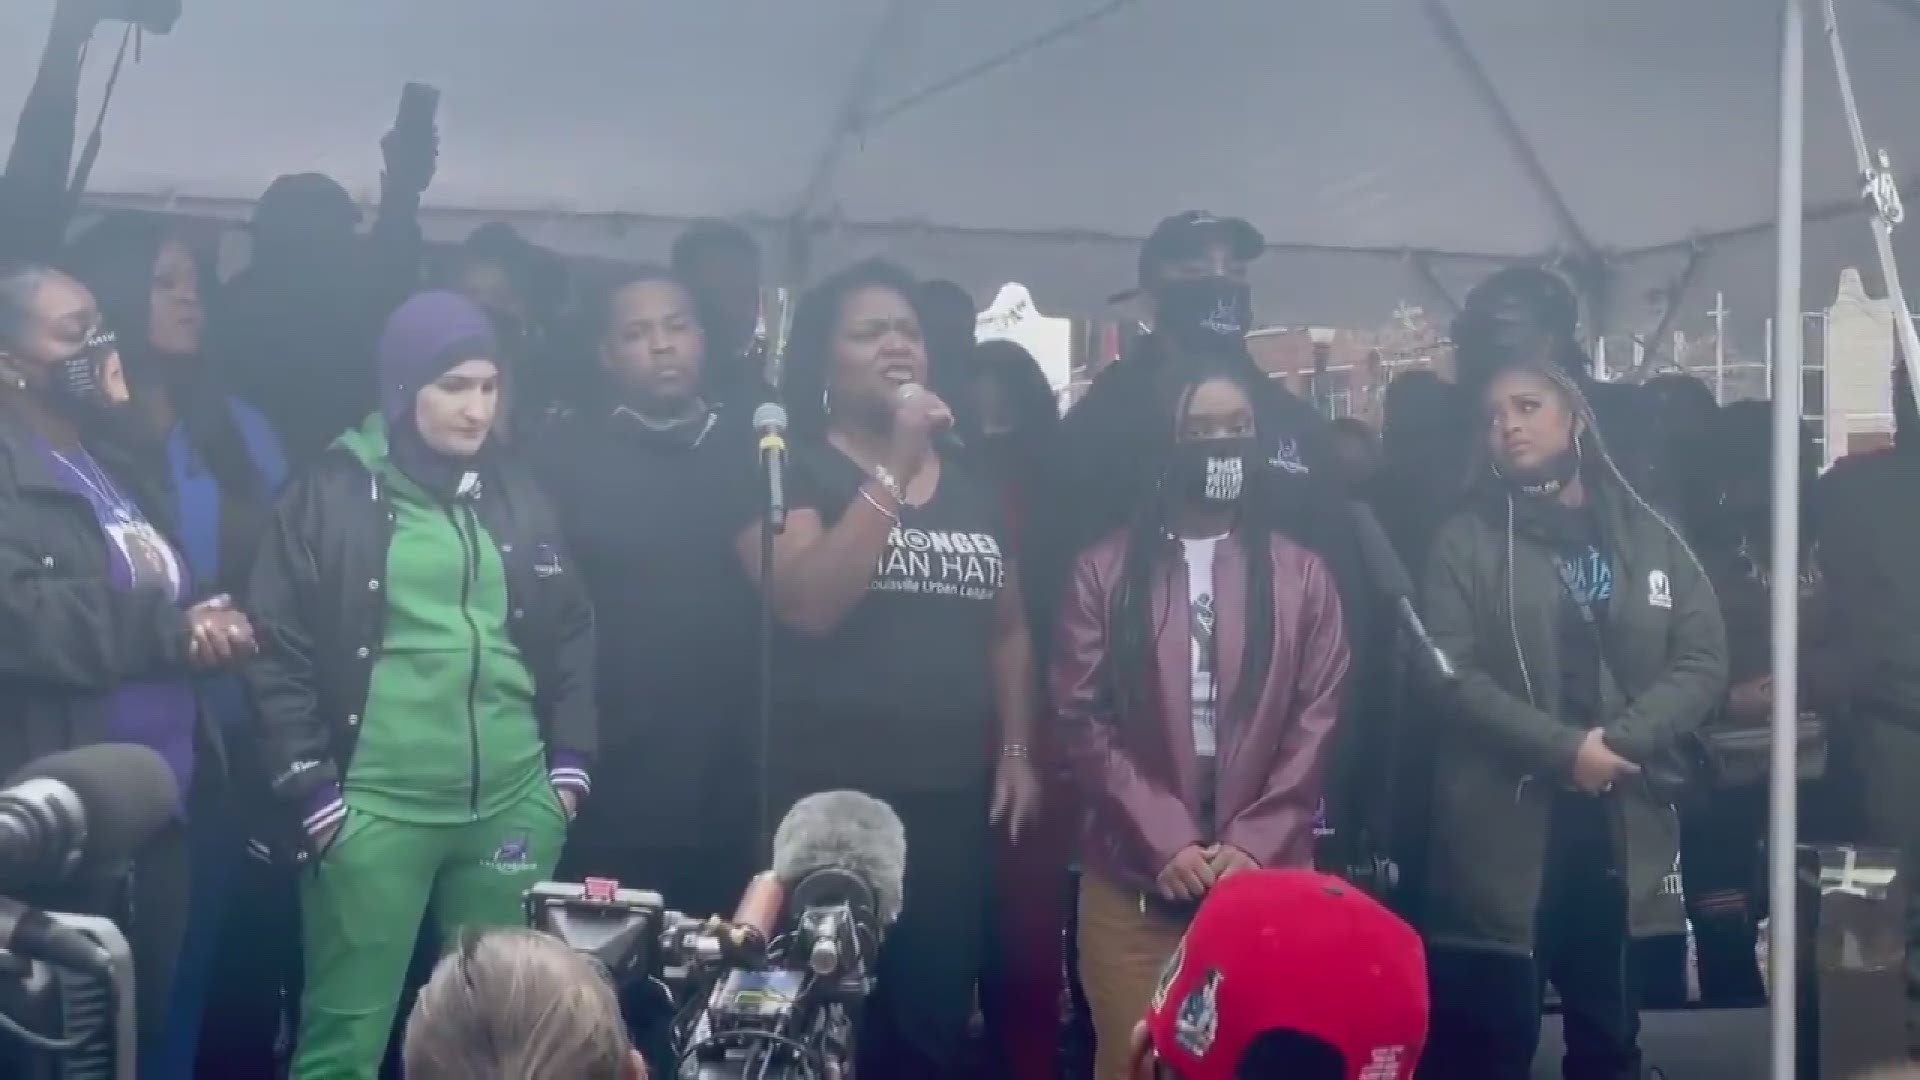 Hundreds gathered in downtown Louisville's Jefferson Square Park to remember Breonna Taylor who was shot, killed by LMPD exactly one year ago today: March 13, 2020.